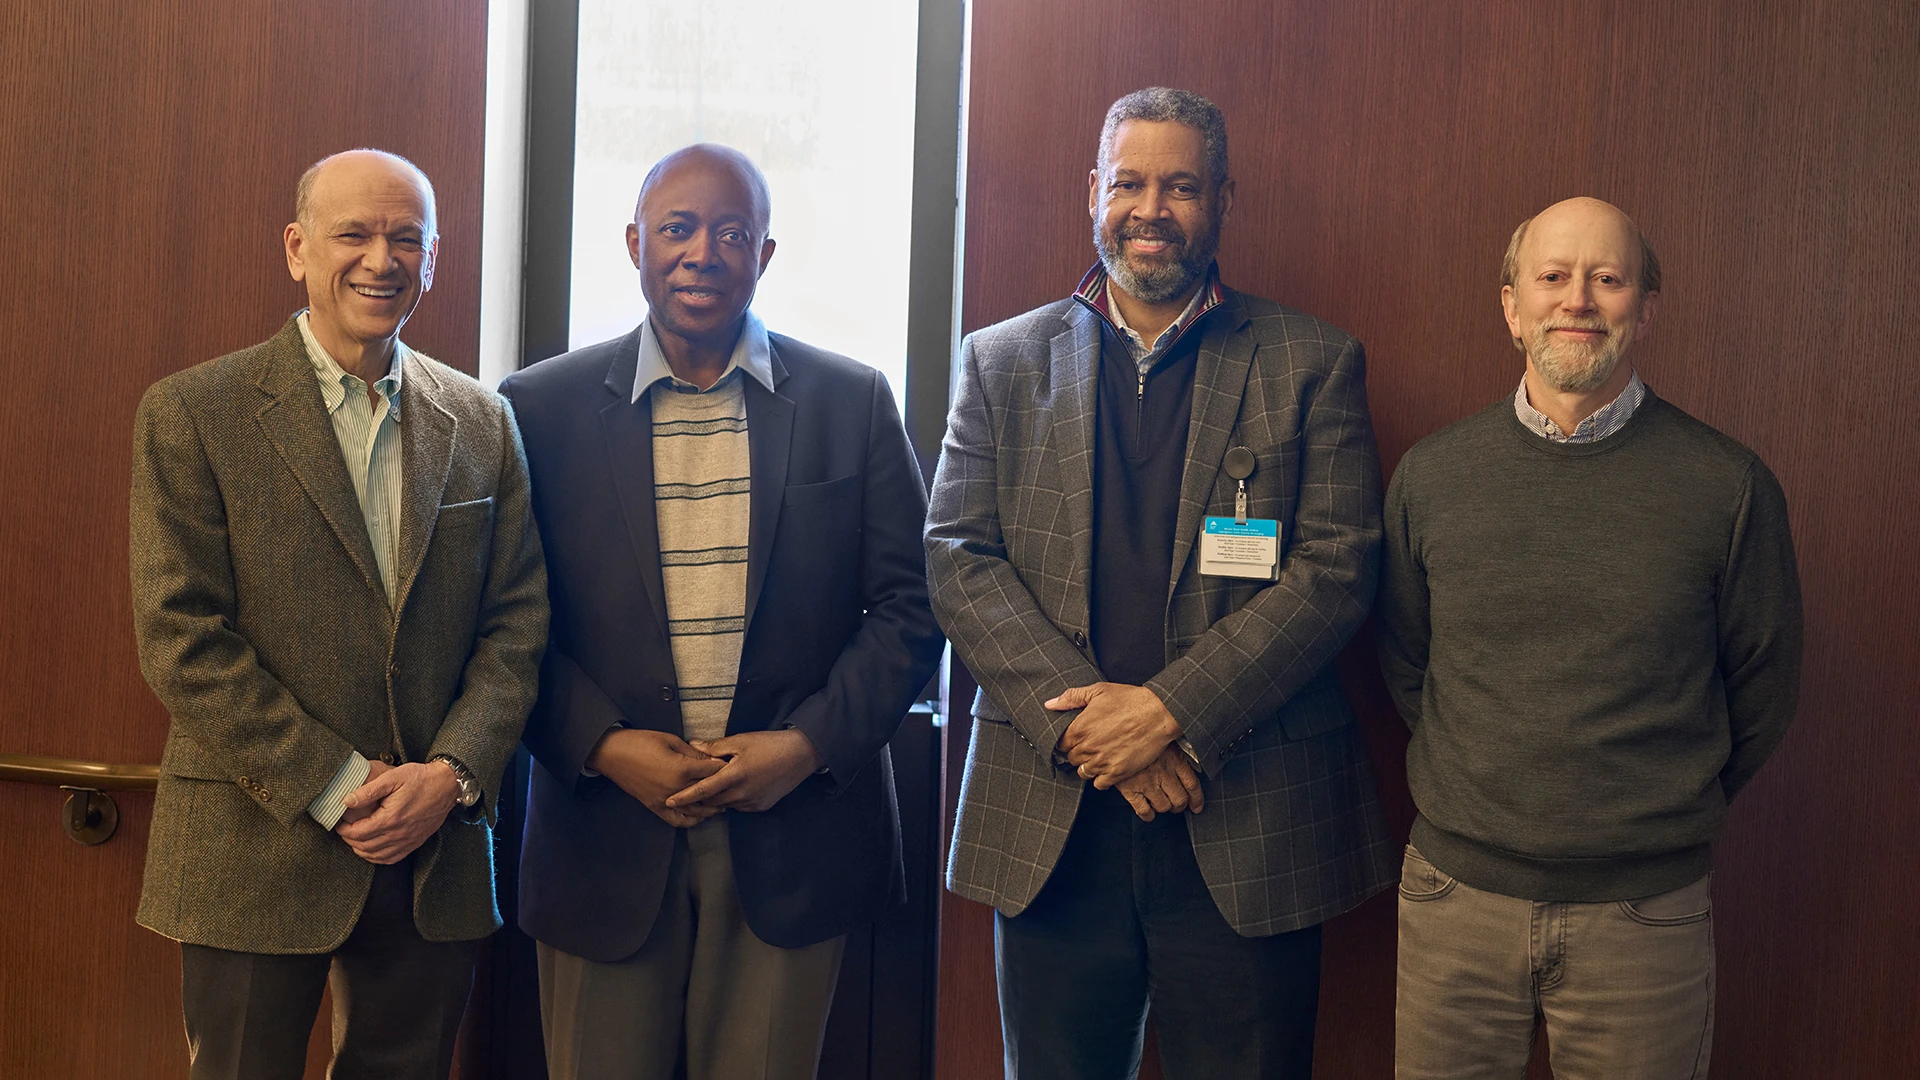 Neuroscientist Sanika S. Chirwa, MD, PhD, second from left, presented the first lecture in the Mount Sinai–Meharry Medical College Faculty Exchange Program. From left are Eric J. Nestler, MD, PhD; Reginald W. Miller, DVM, DACLAM; and Paul A. Slesinger, PhD.